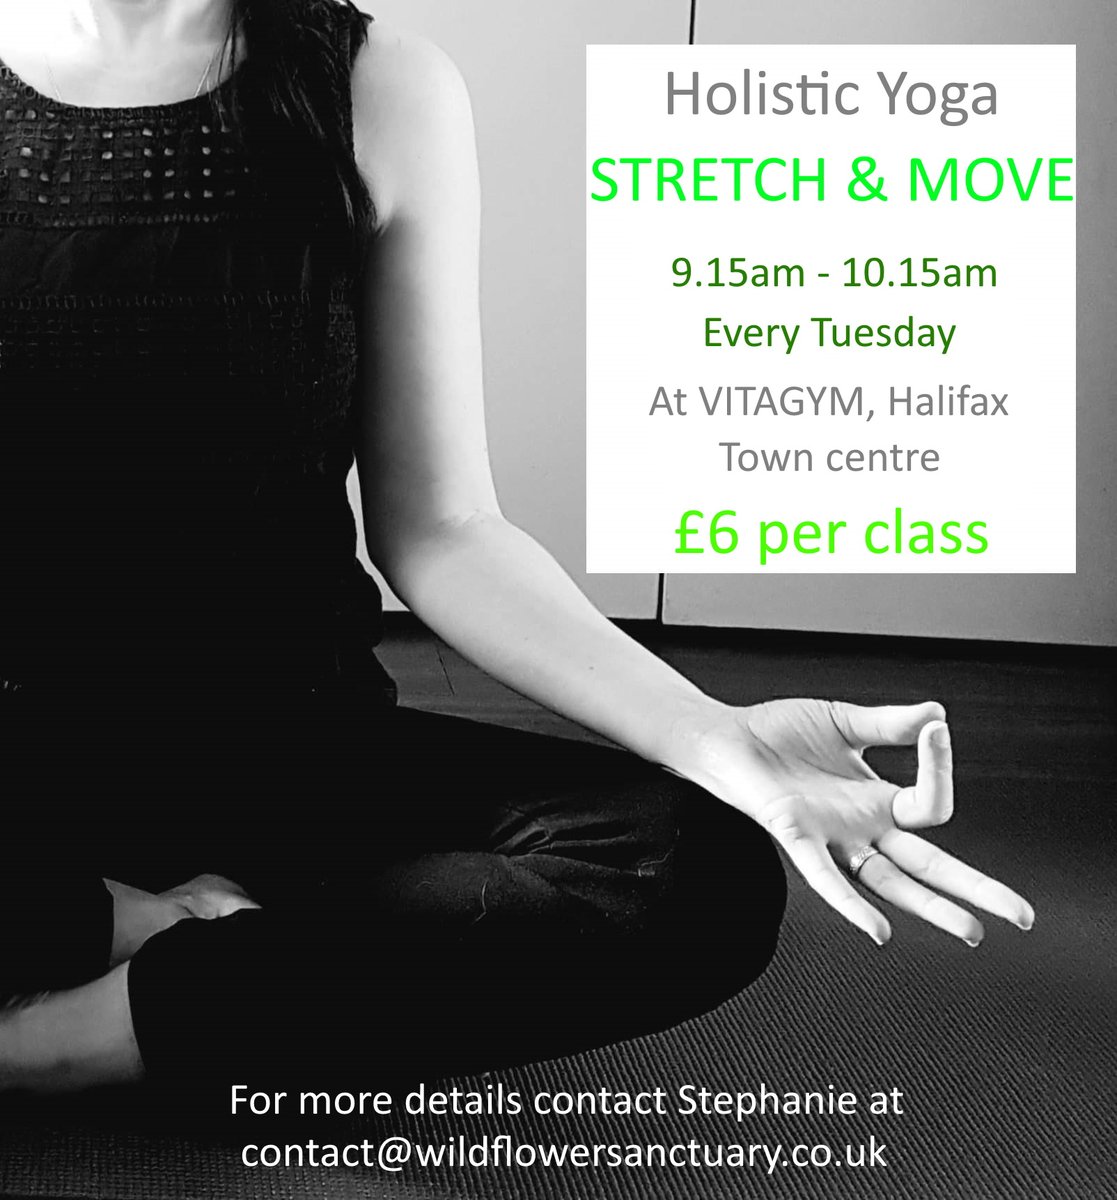 Stretch & Move every Tues morning with a gentle yoga workout at Vita Gym, Hx town centre.  For more details visit wildflowersanctuary.co.uk #halifaxuk #calderdale #culturedale #whatsonhalifax #halifaxwhatson #halifaxwestyorkshire #discoverhalifax